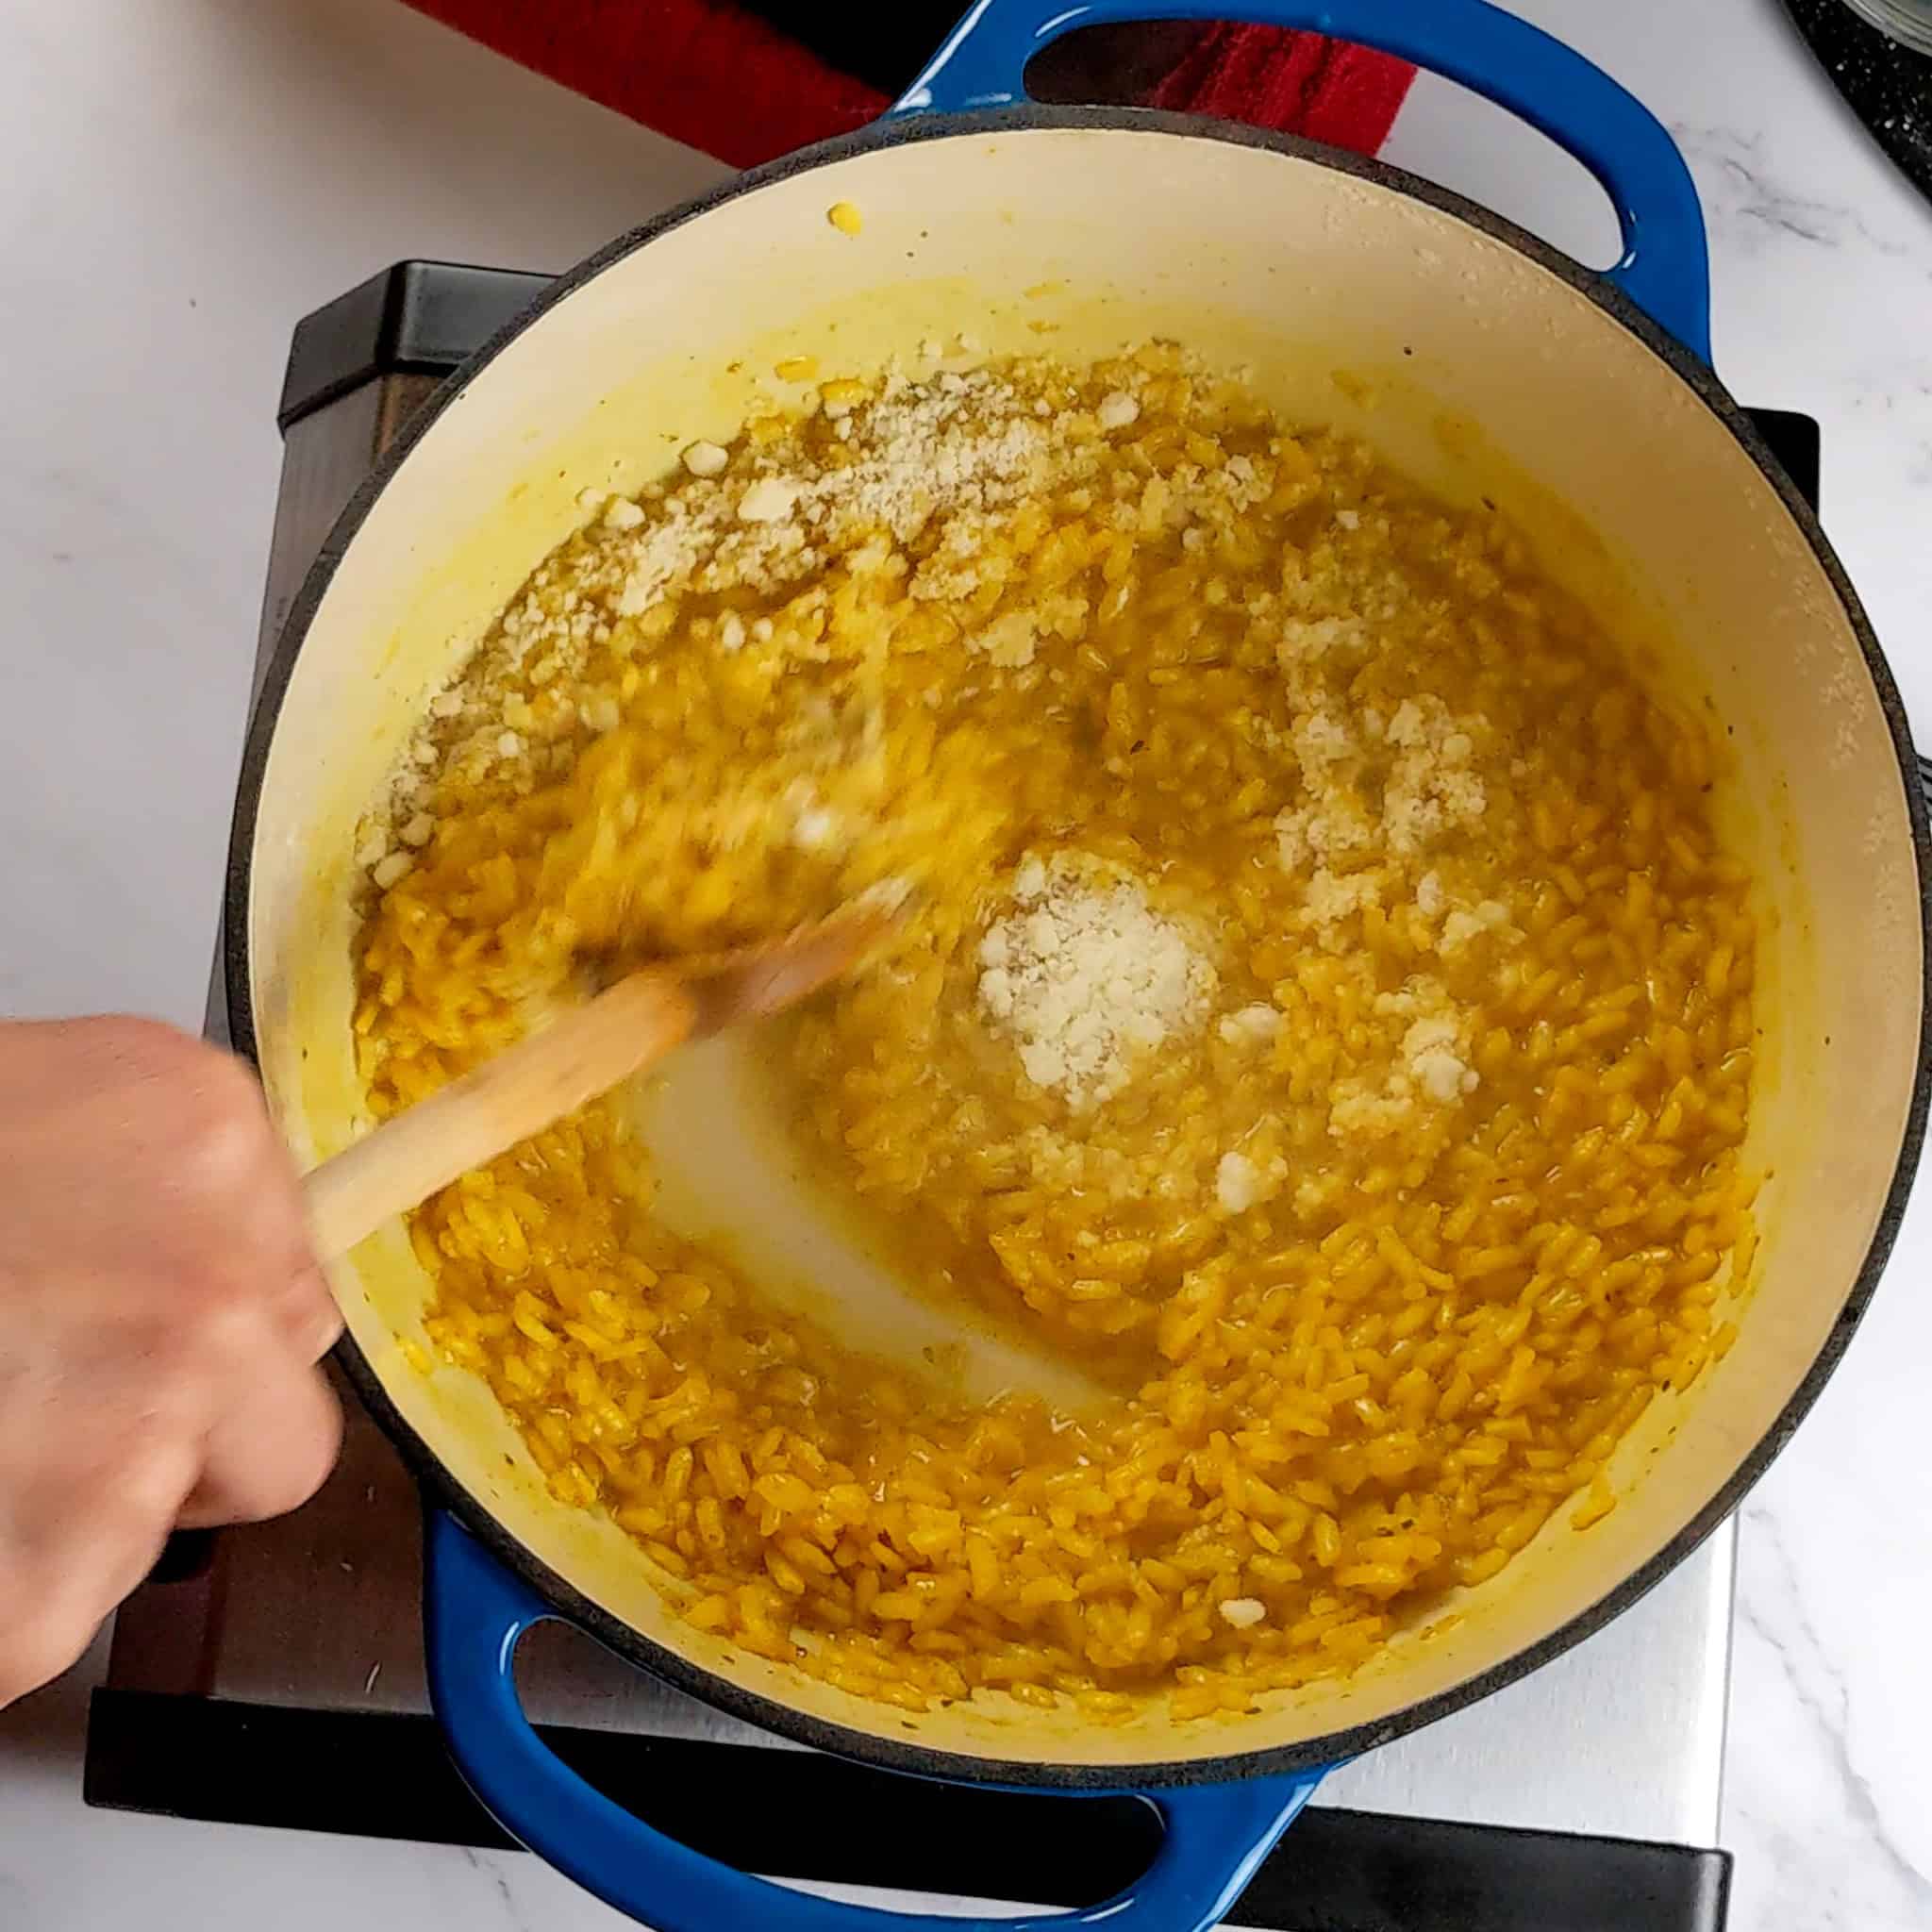 grated pecorino cheese being mixed into the yellow risotto with a wooden spoon.